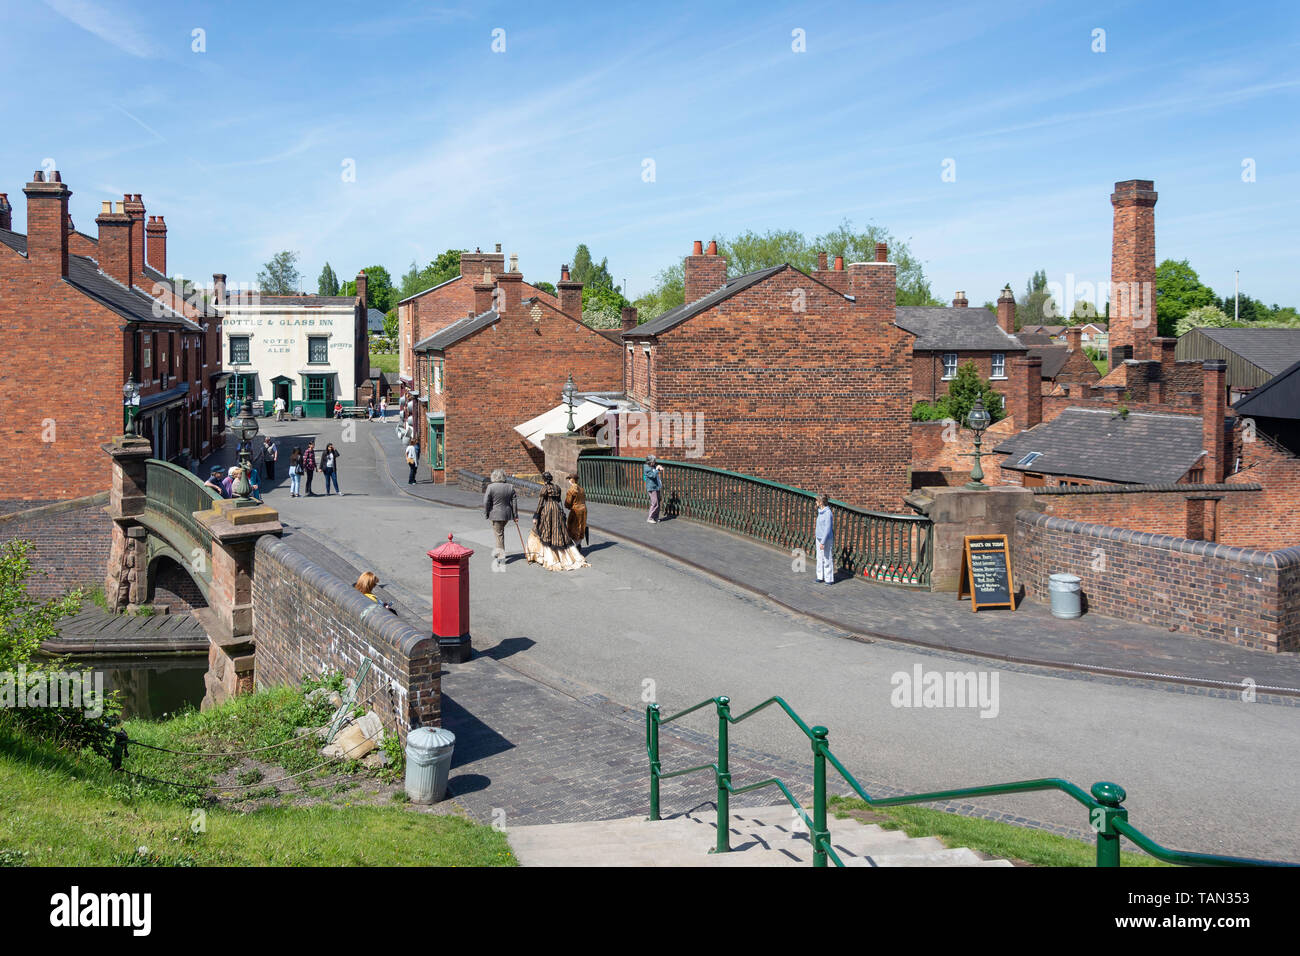 Canal Street Bridge, Canal Street, Black Country Living Museum, Dudley, West Midlands, England, United Kingdom Stock Photo